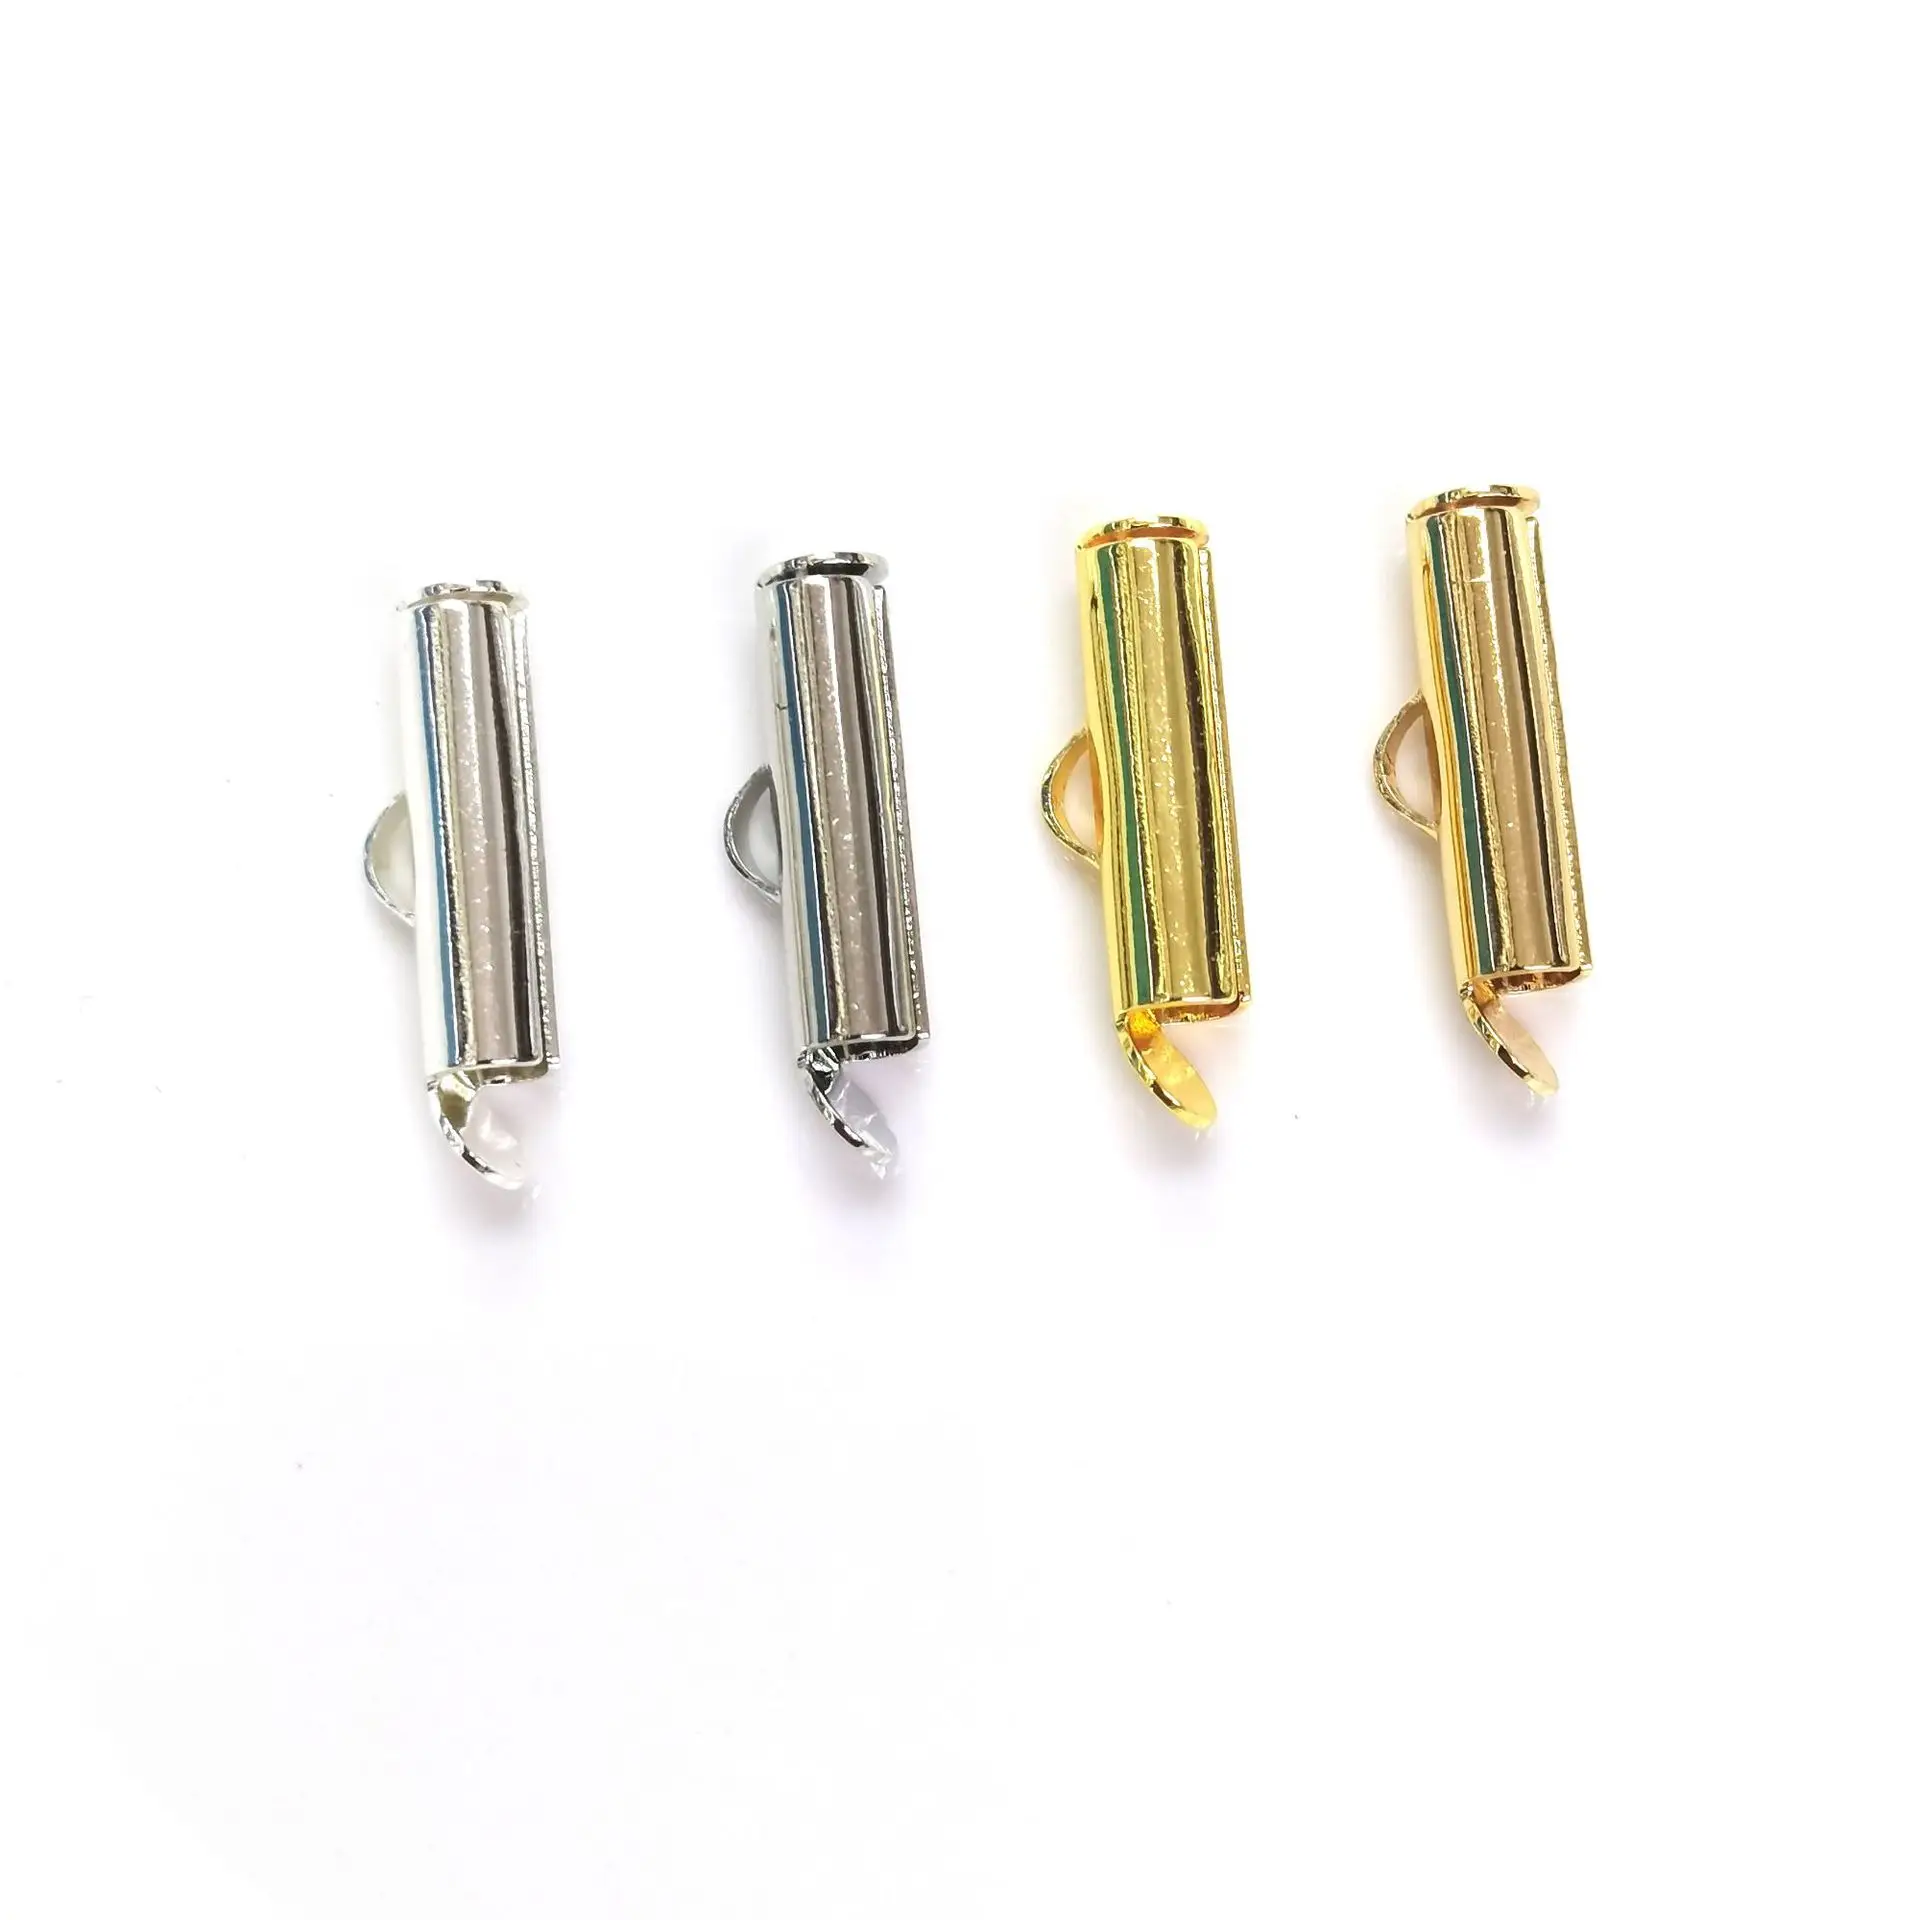 

10pcs/lot 14K Crimp Beads Slide End Clasp With Chain Buckles Tubes Slider End Caps Connectors For DIY Jewelry Making Accessories